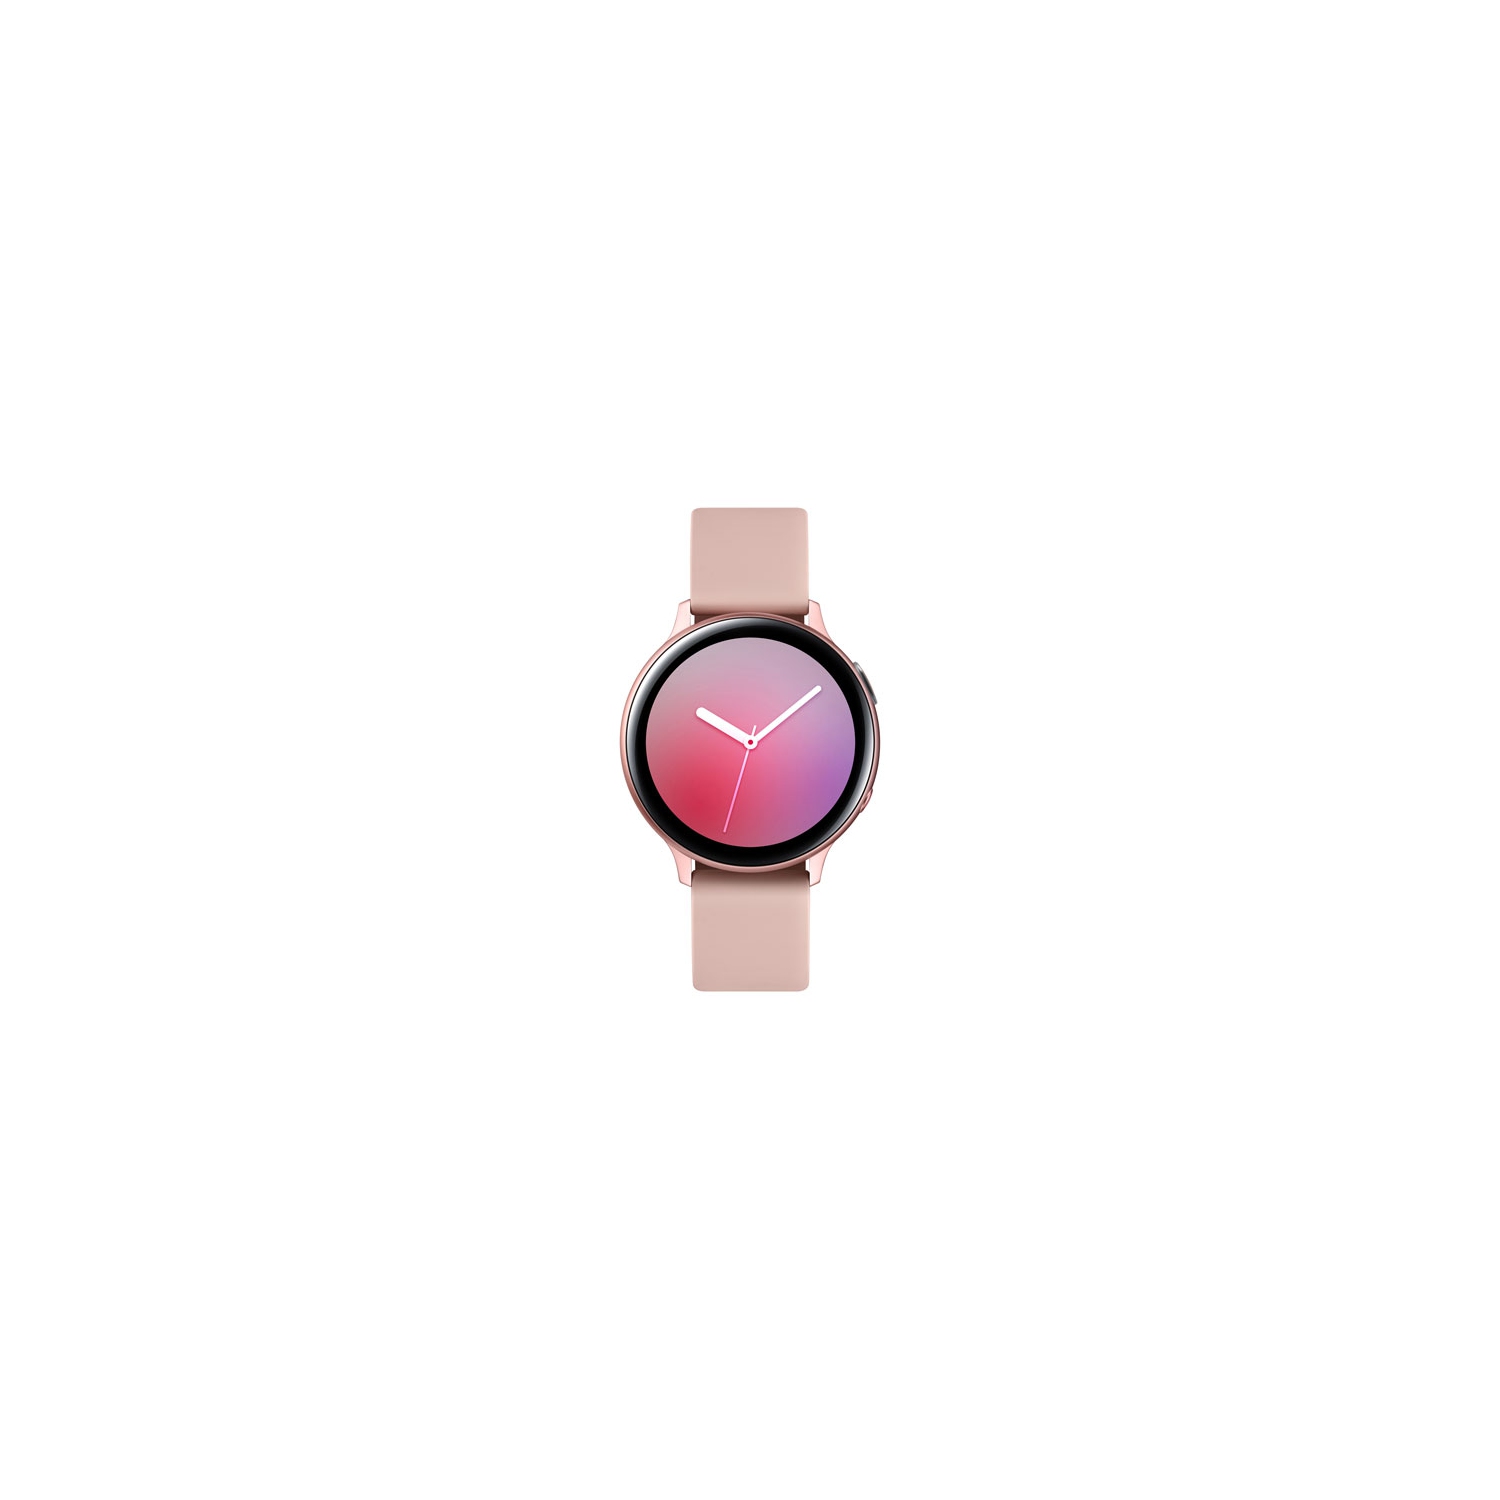 Samsung Galaxy Watch Active2 40mm LTE Smartwatch with Heart Rate Monitor - Aluminum Pink Gold - Open Box